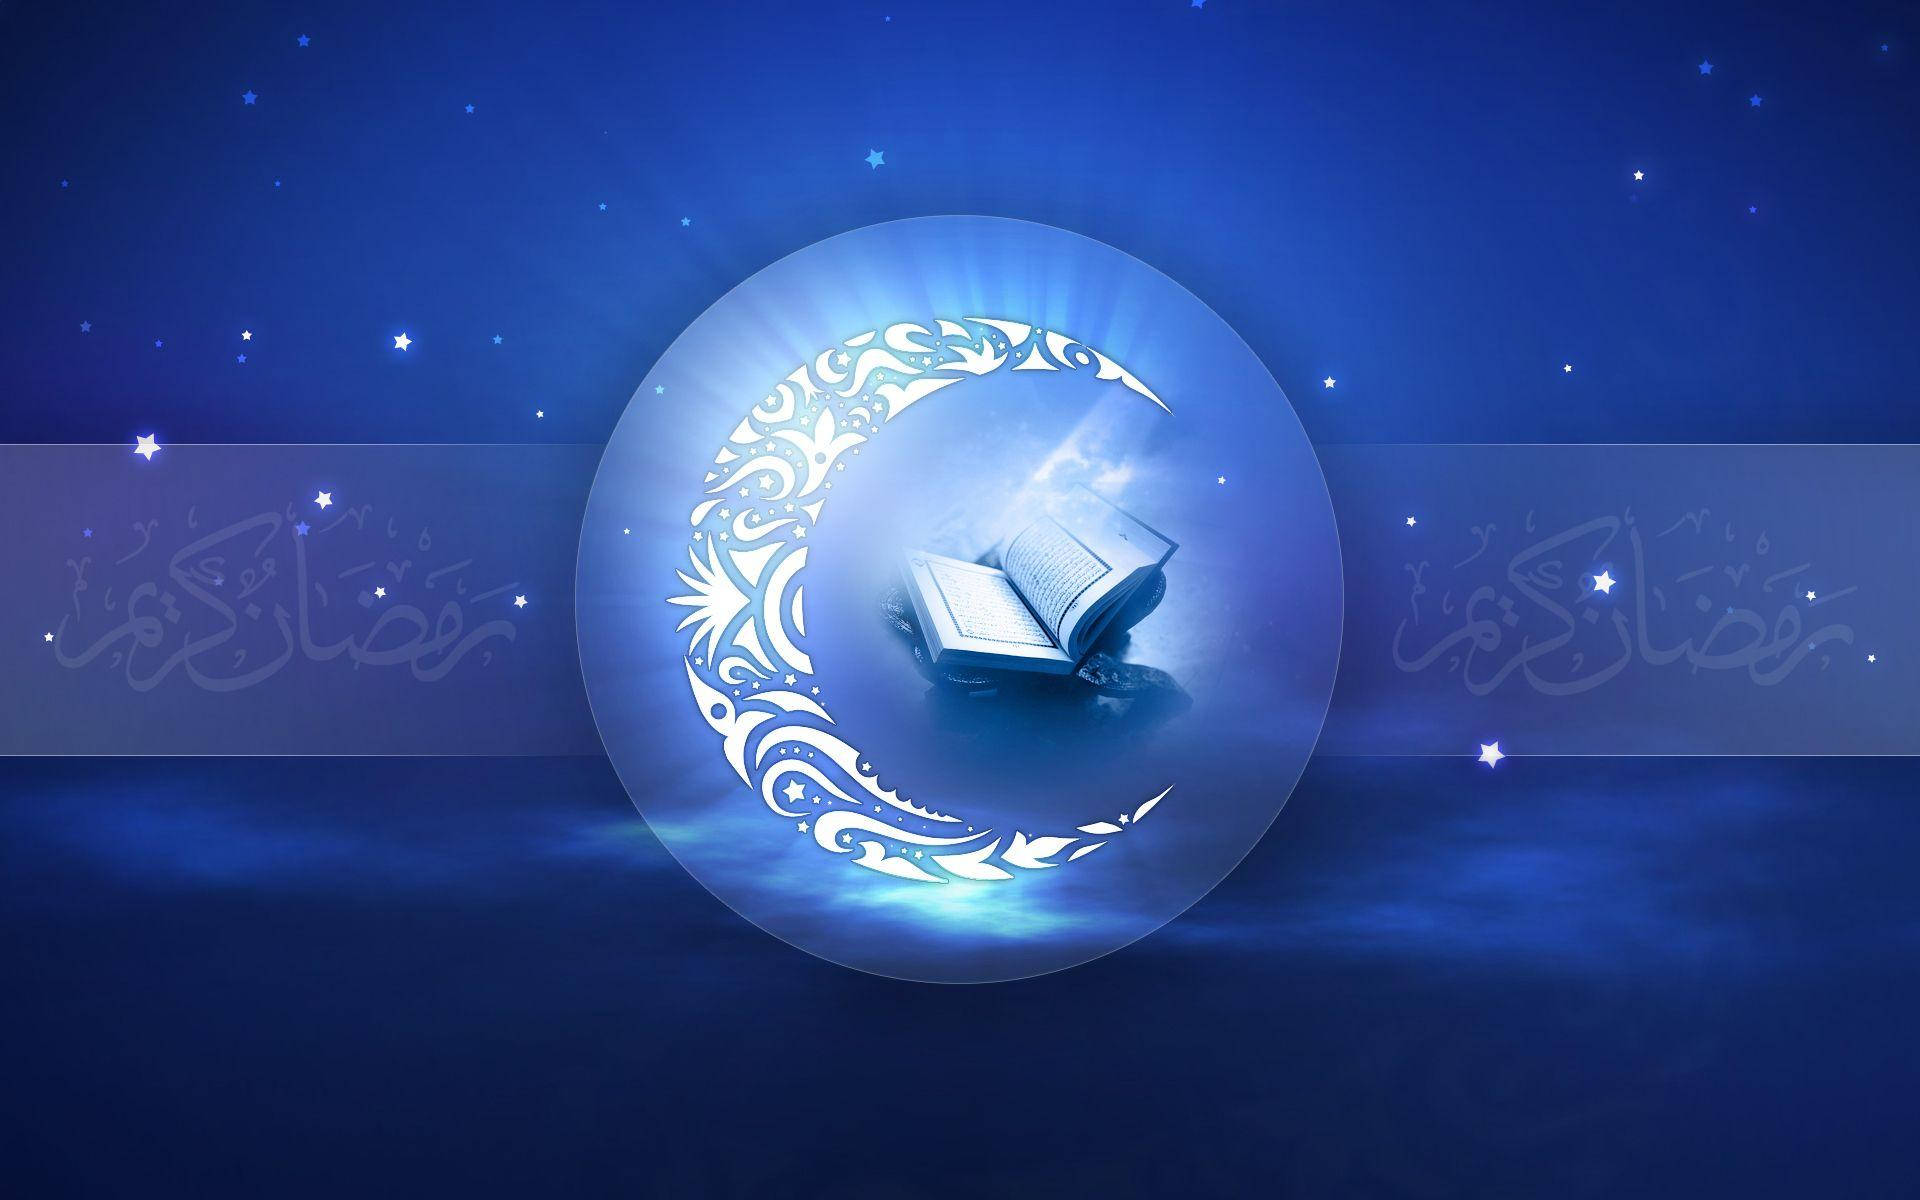 Ramadan With Crescent Moon And Quran